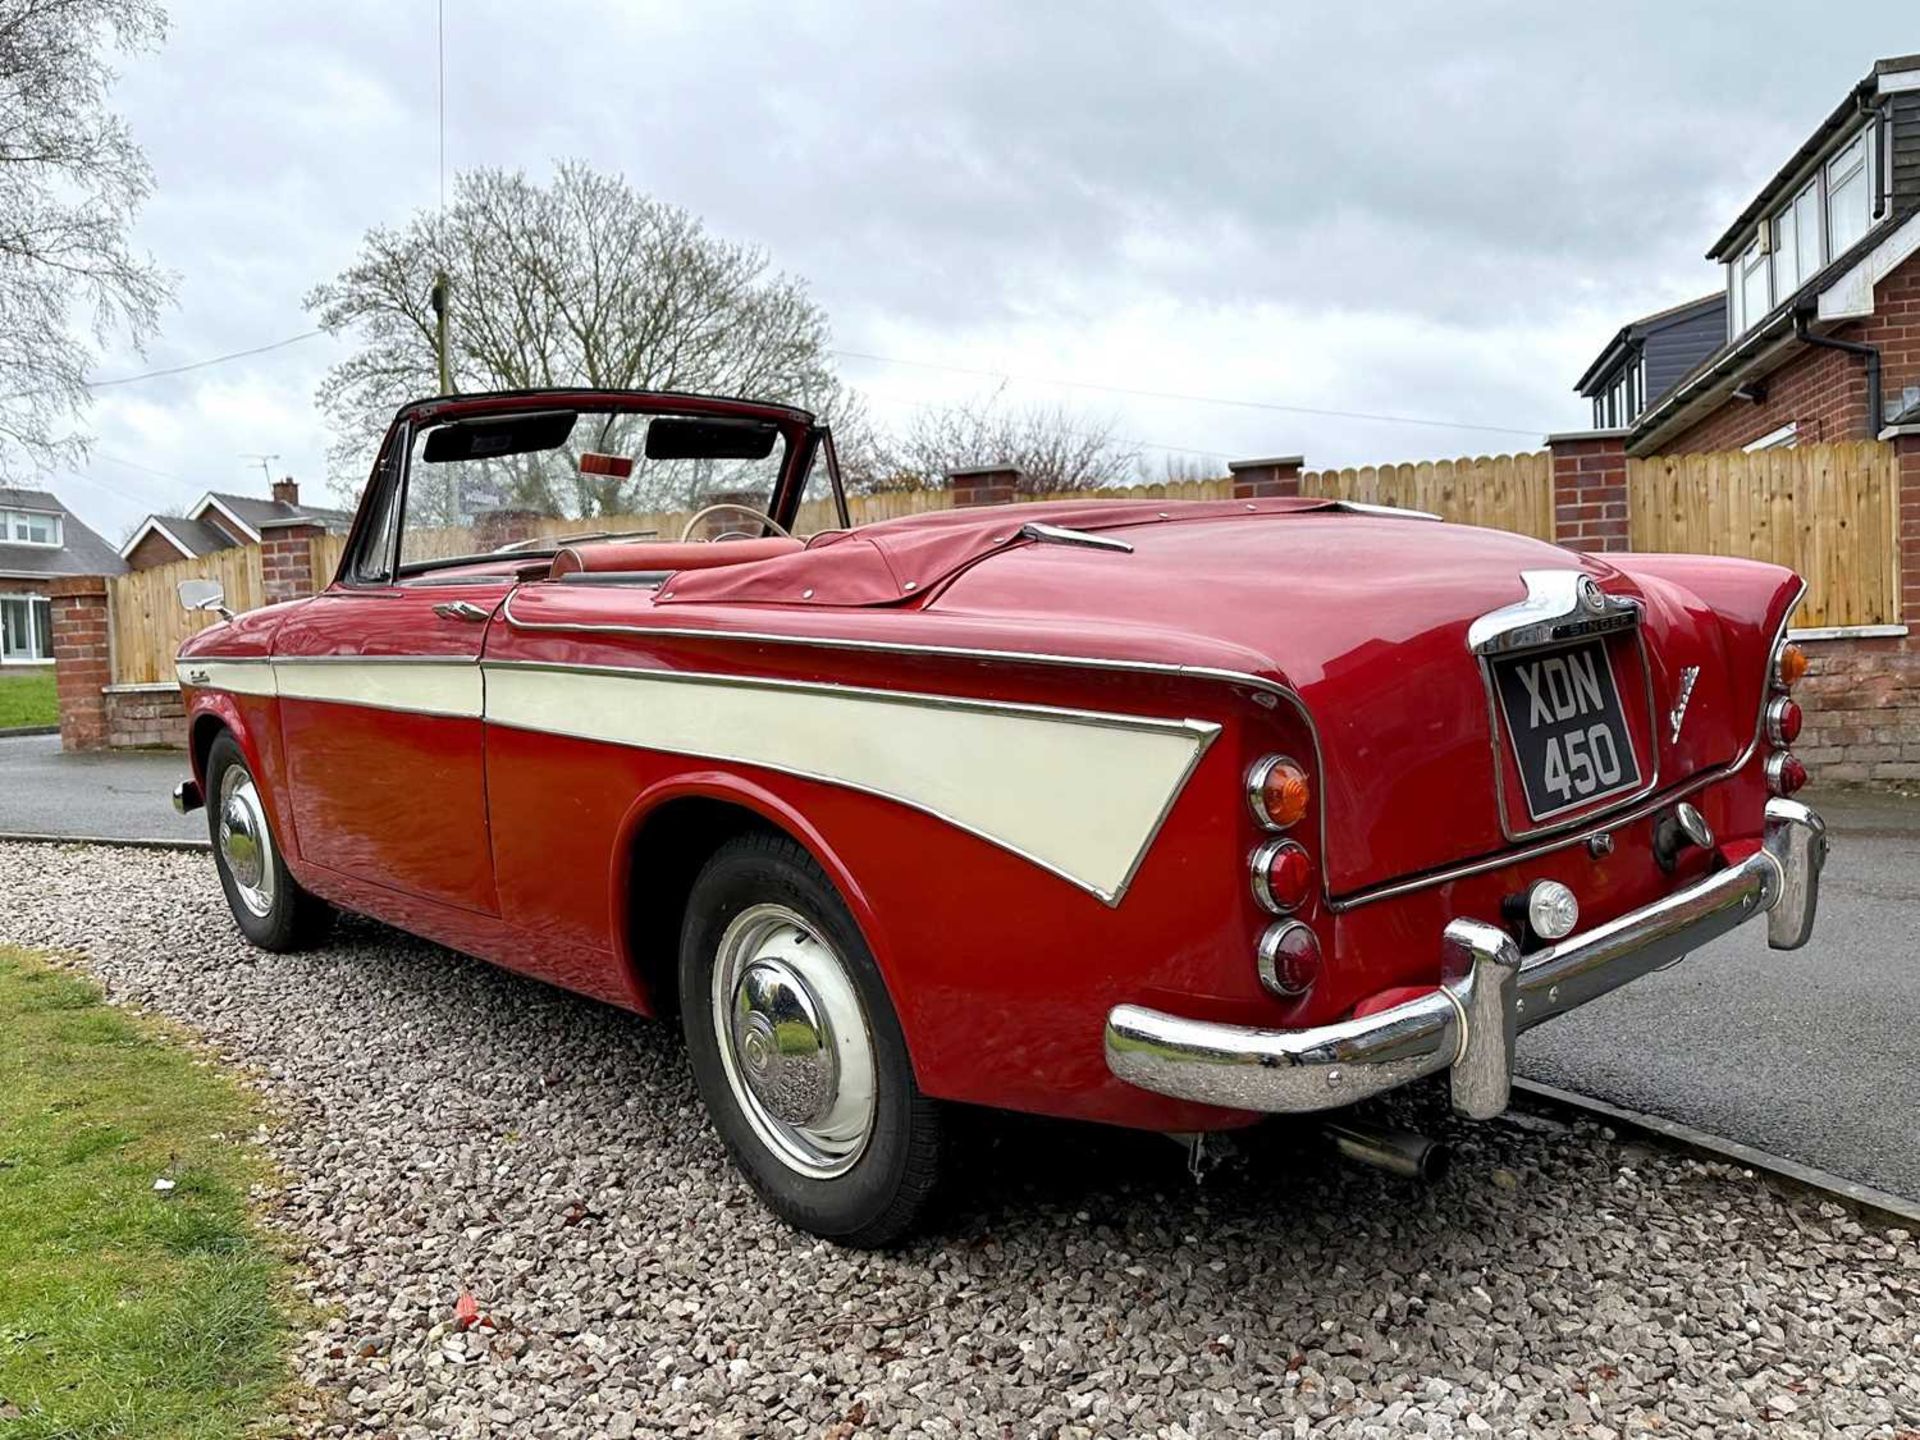 1961 Singer Gazelle Convertible Comes complete with overdrive, period radio and badge bar - Image 33 of 95